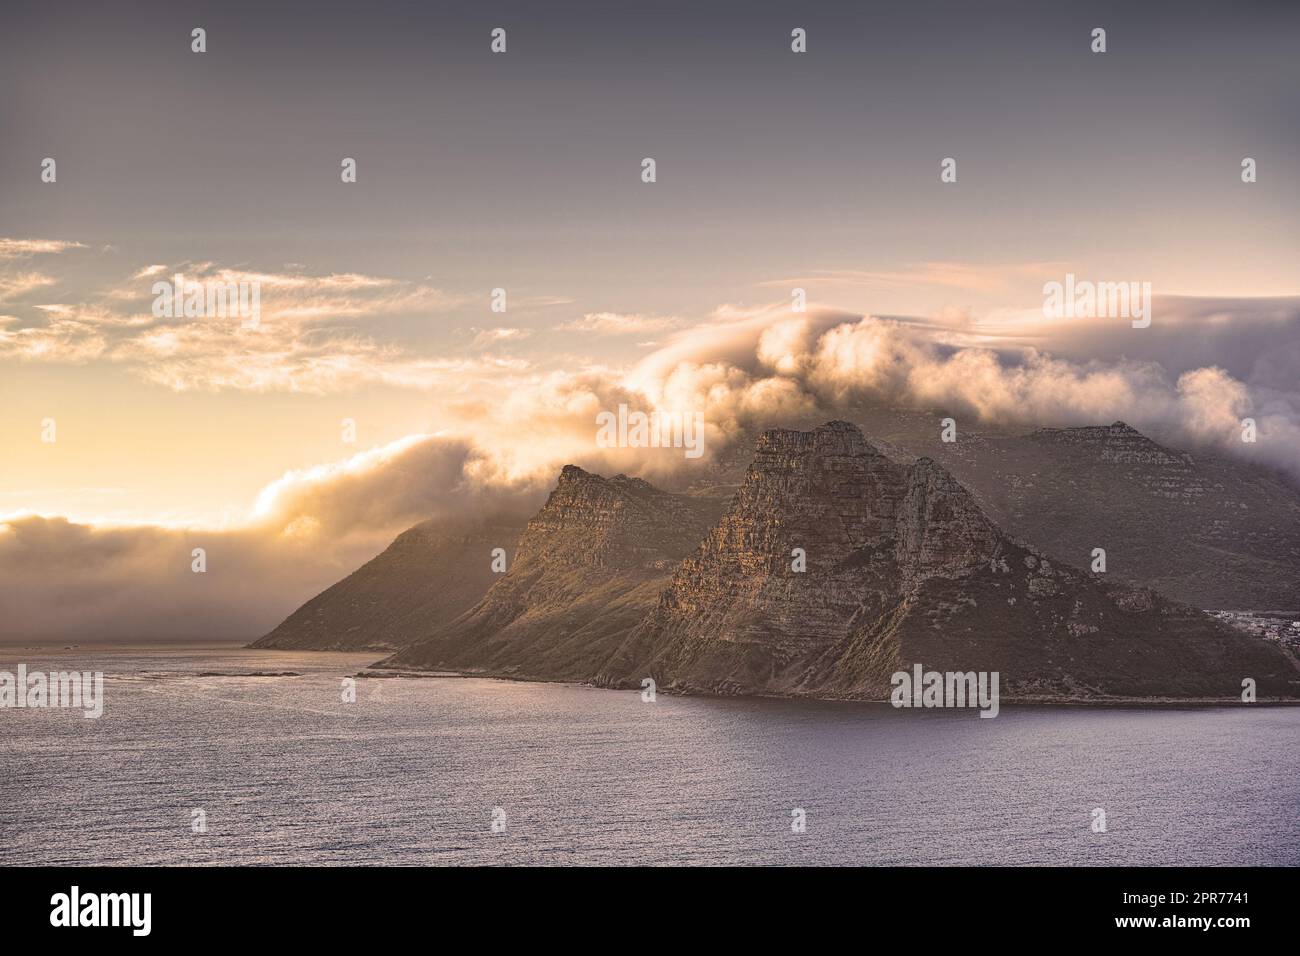 Panorama of a mountain coastline with a cloudy sunset in South Africa. Scenic landscape of soft white clouds covering Table Mountain at dusk near a calm peaceful sea at Hout Bay near Cape Town. Stock Photo